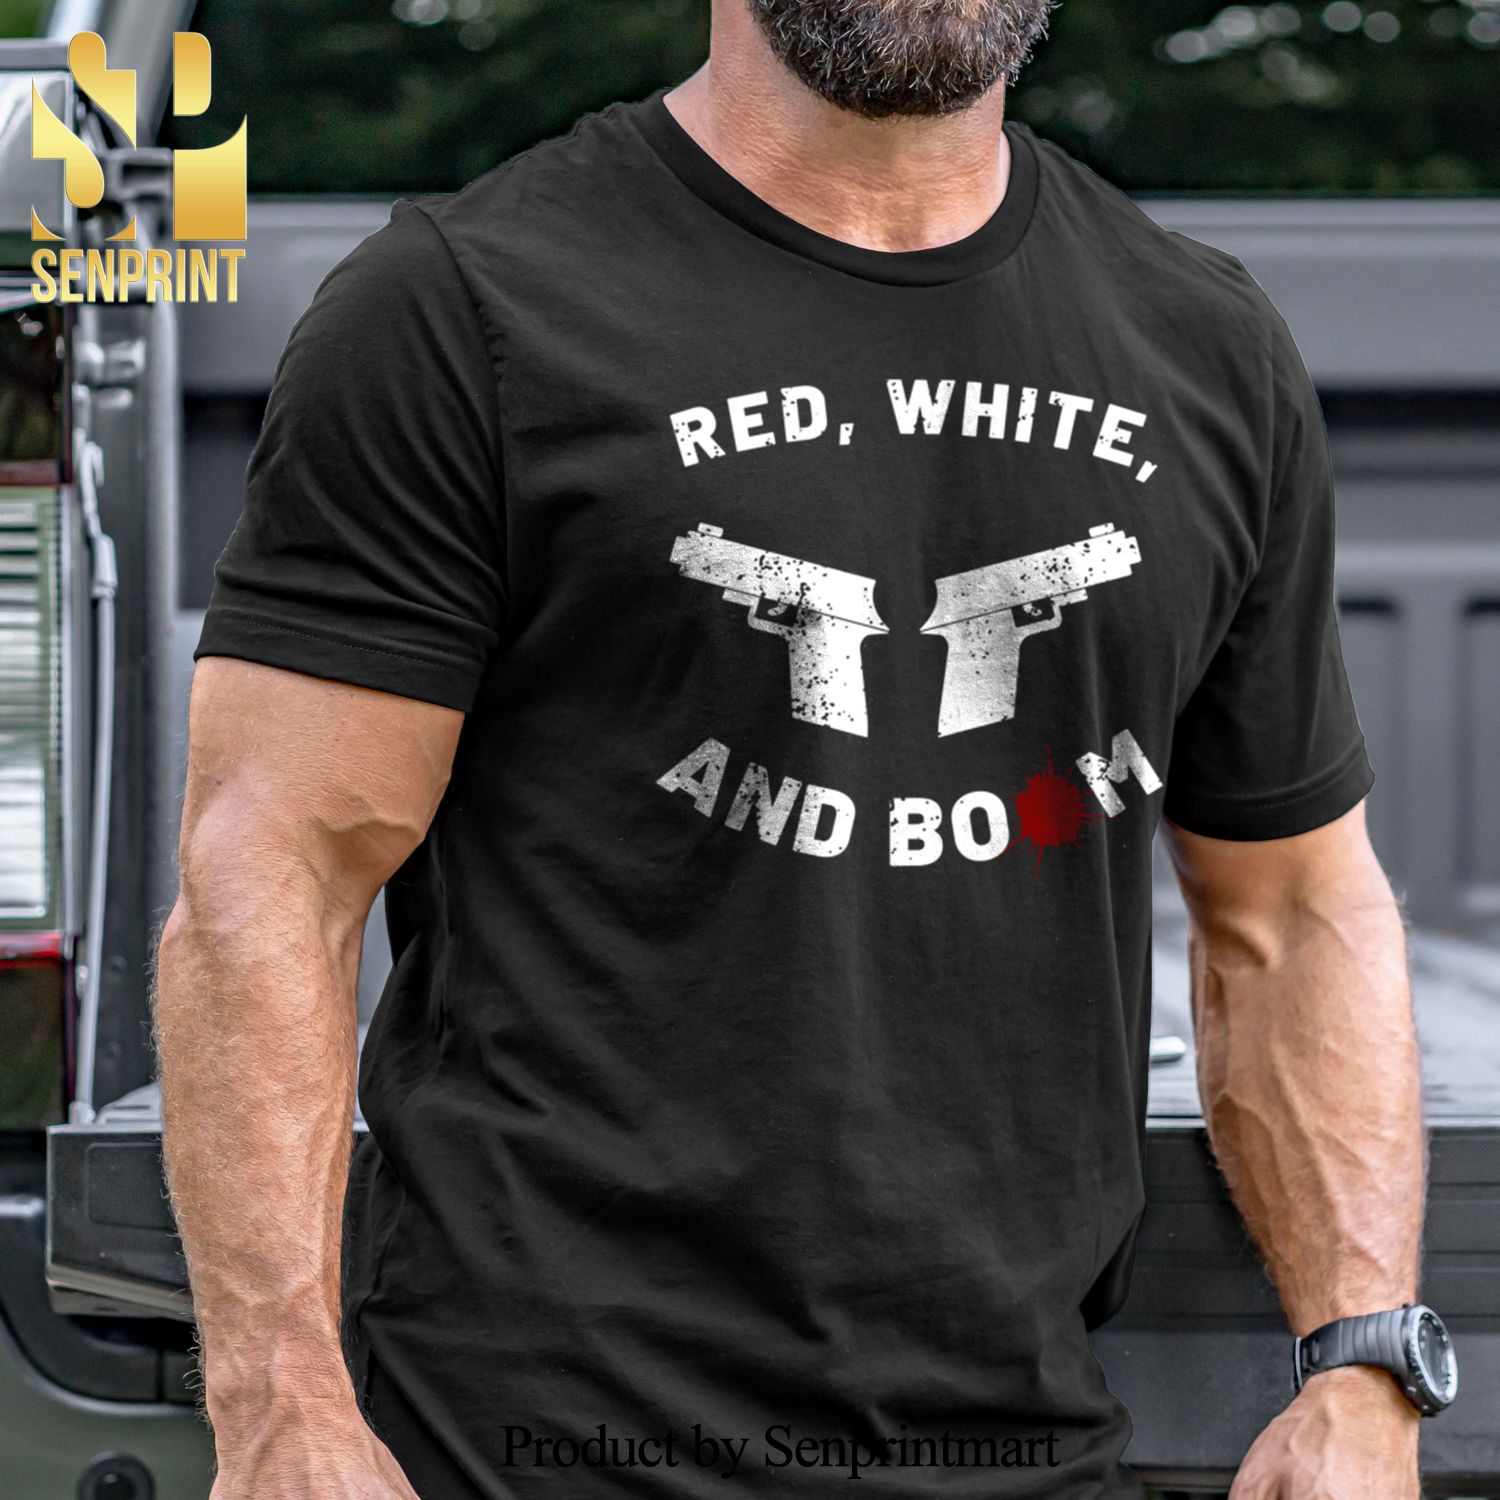 Red, White, and Boom Military Unisex Shirt